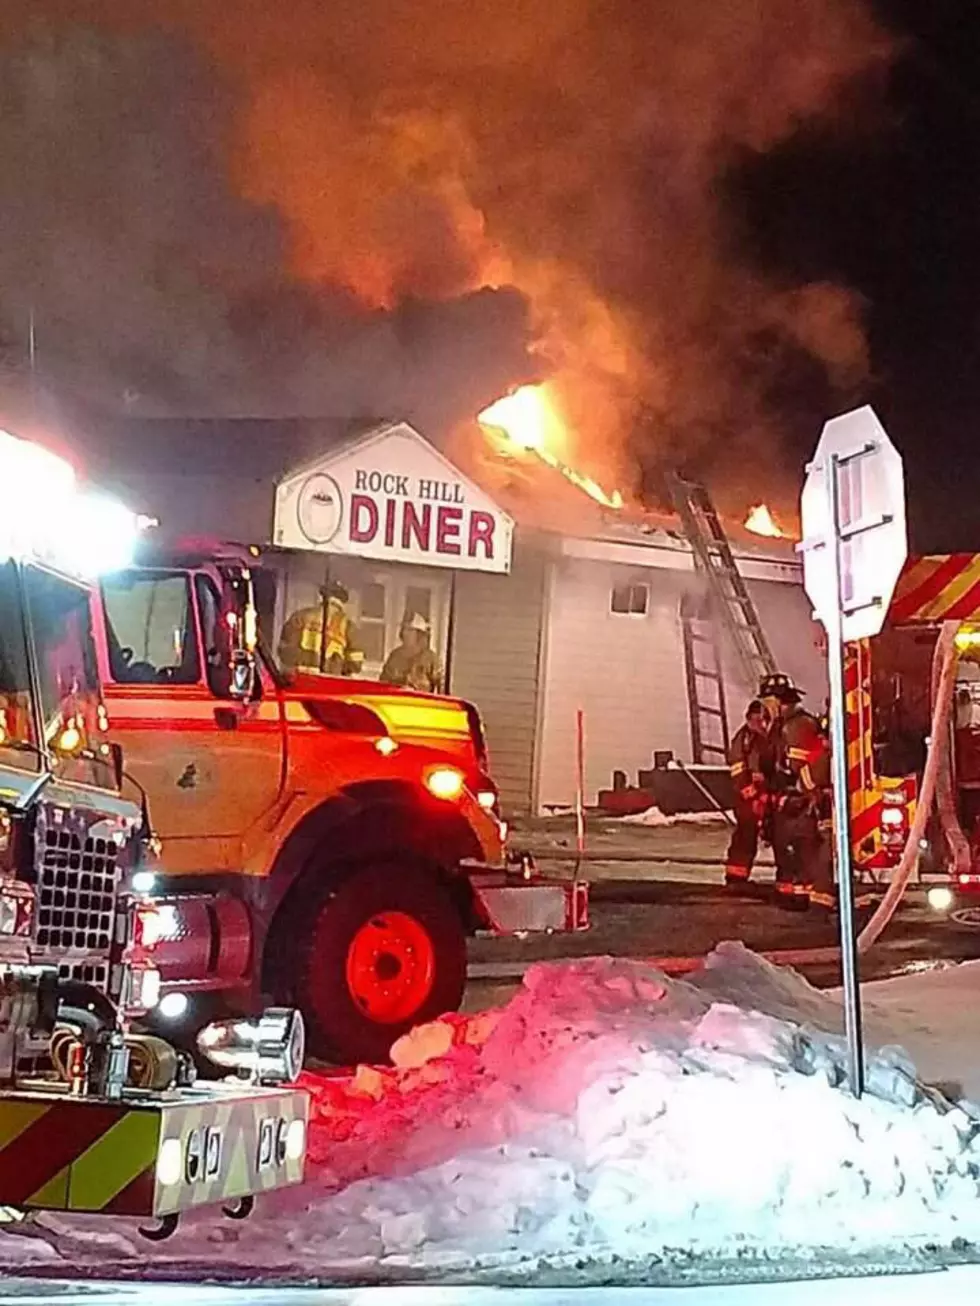 Popular Hudson Valley Diner Damaged in New Year’s Fire